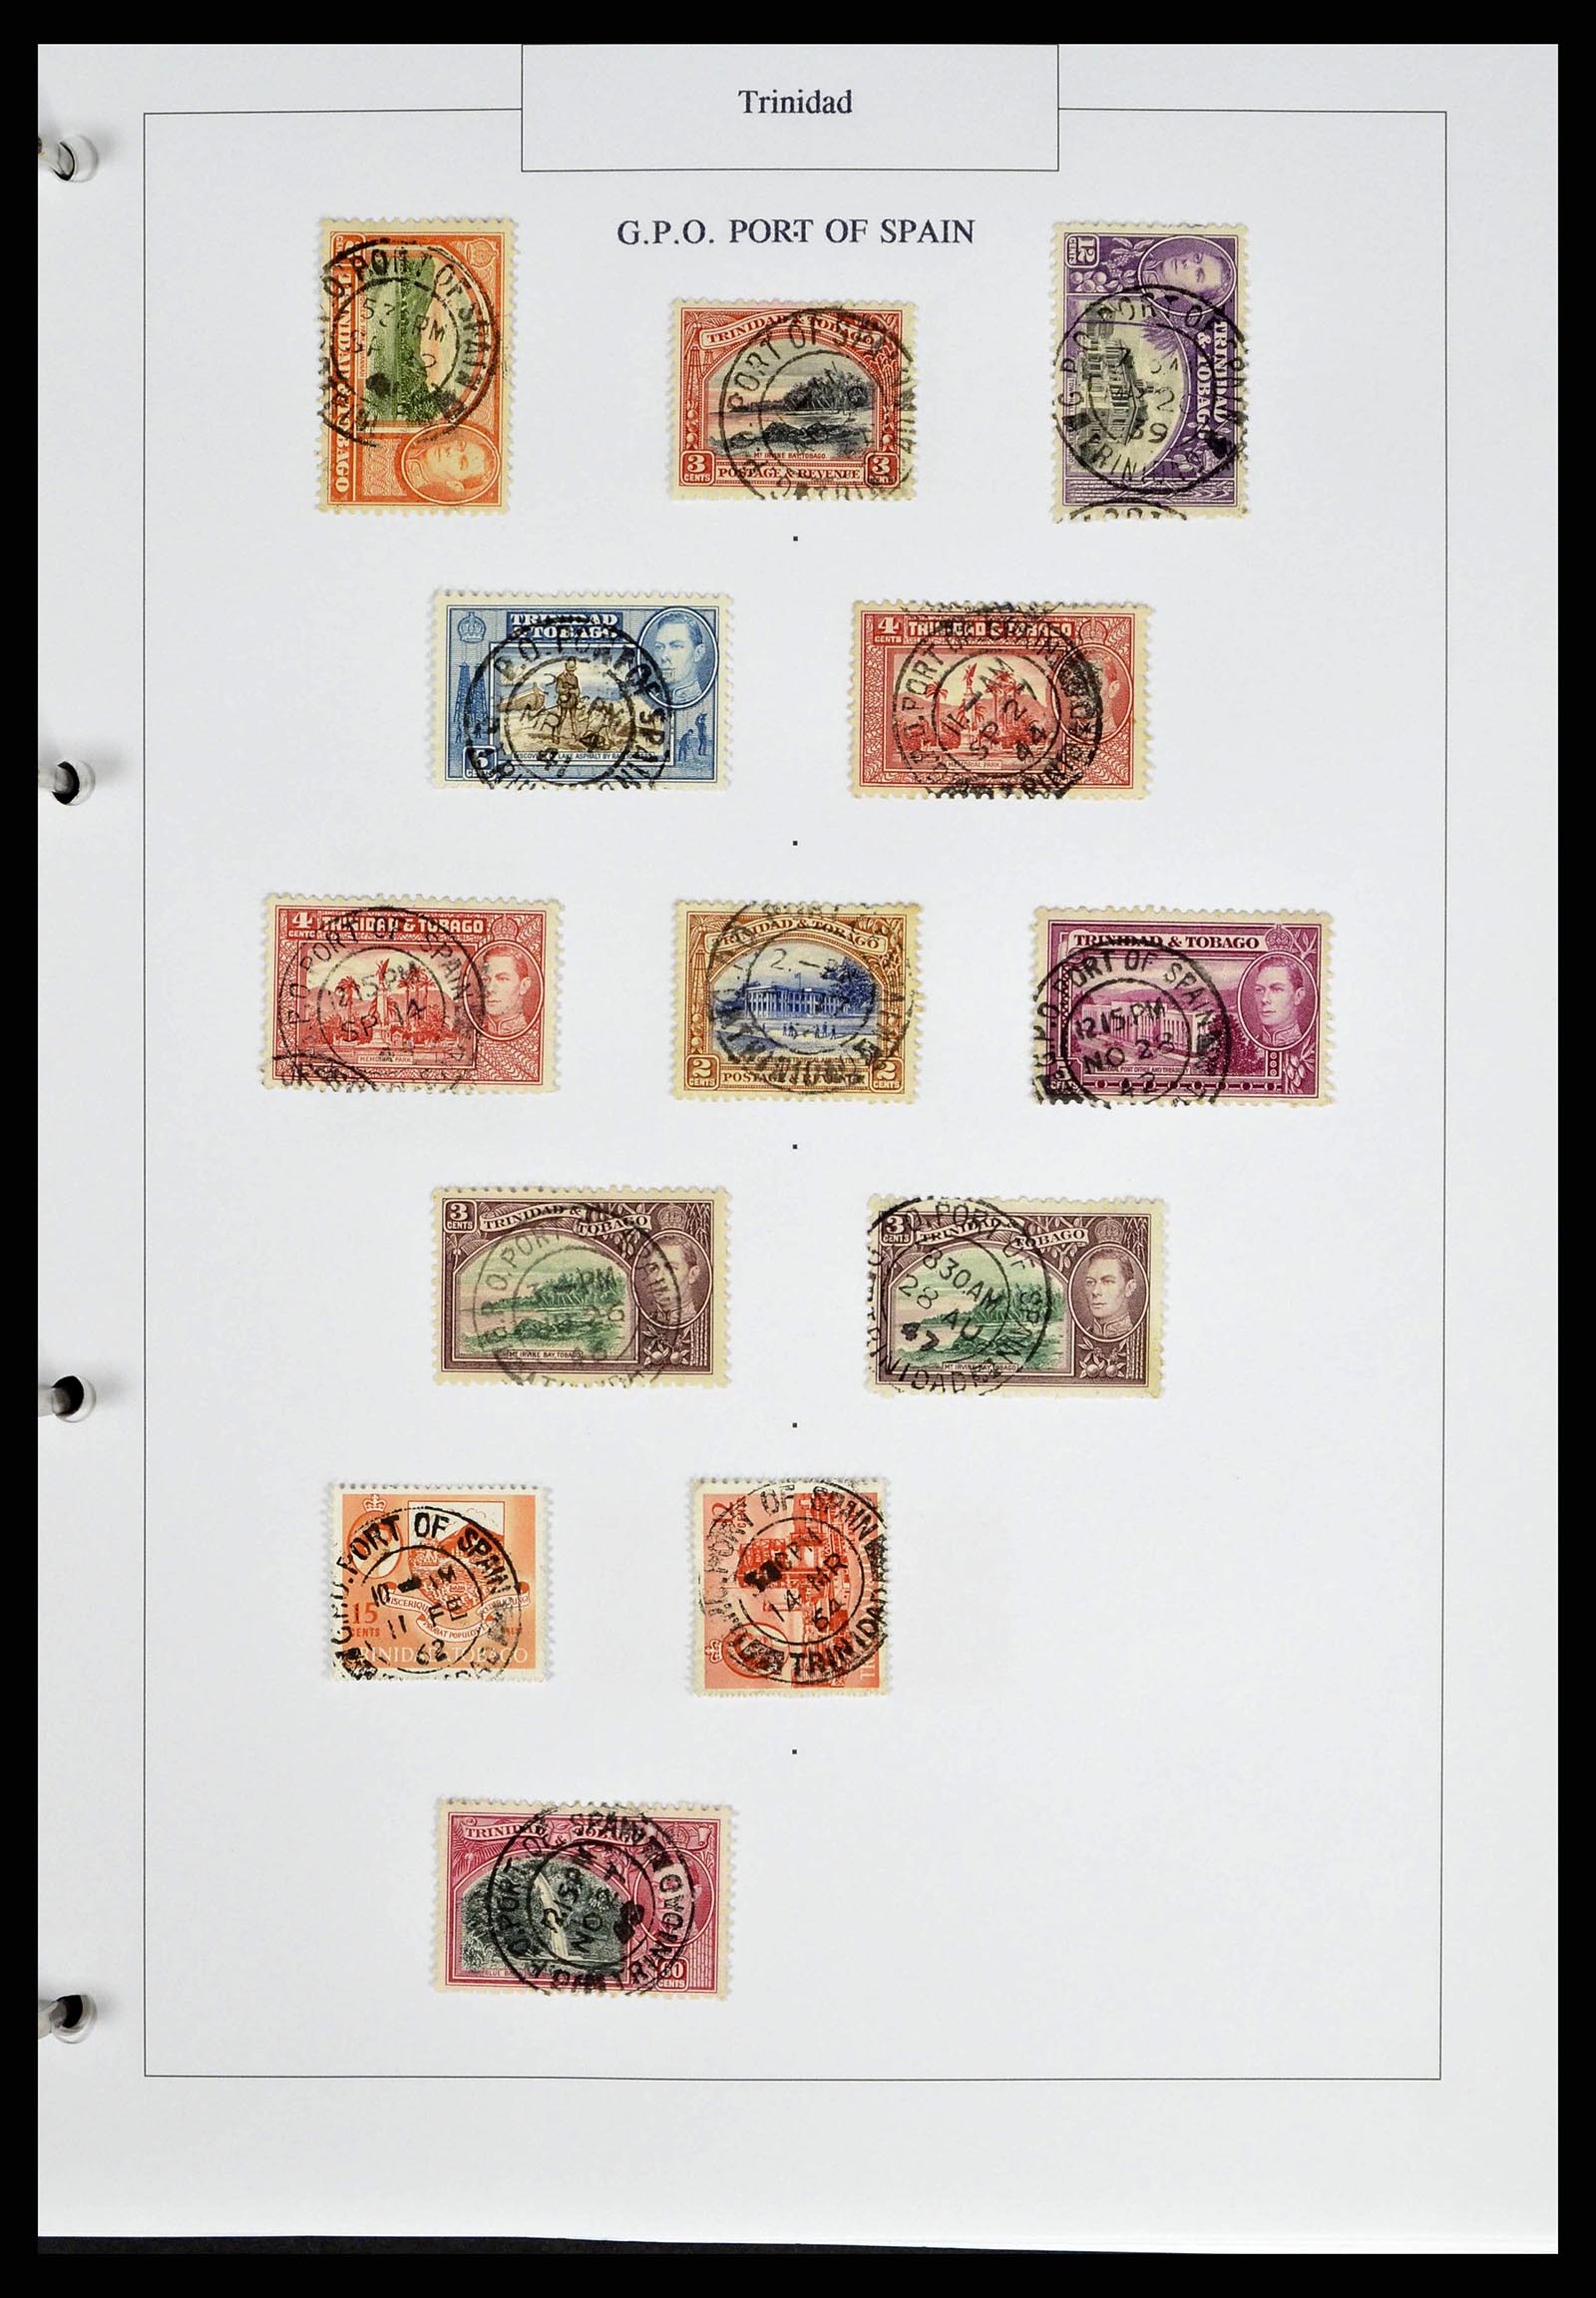 38481 0013 - Stamp collection 38481 Trinidad and Tobago cancels 1859-1960.